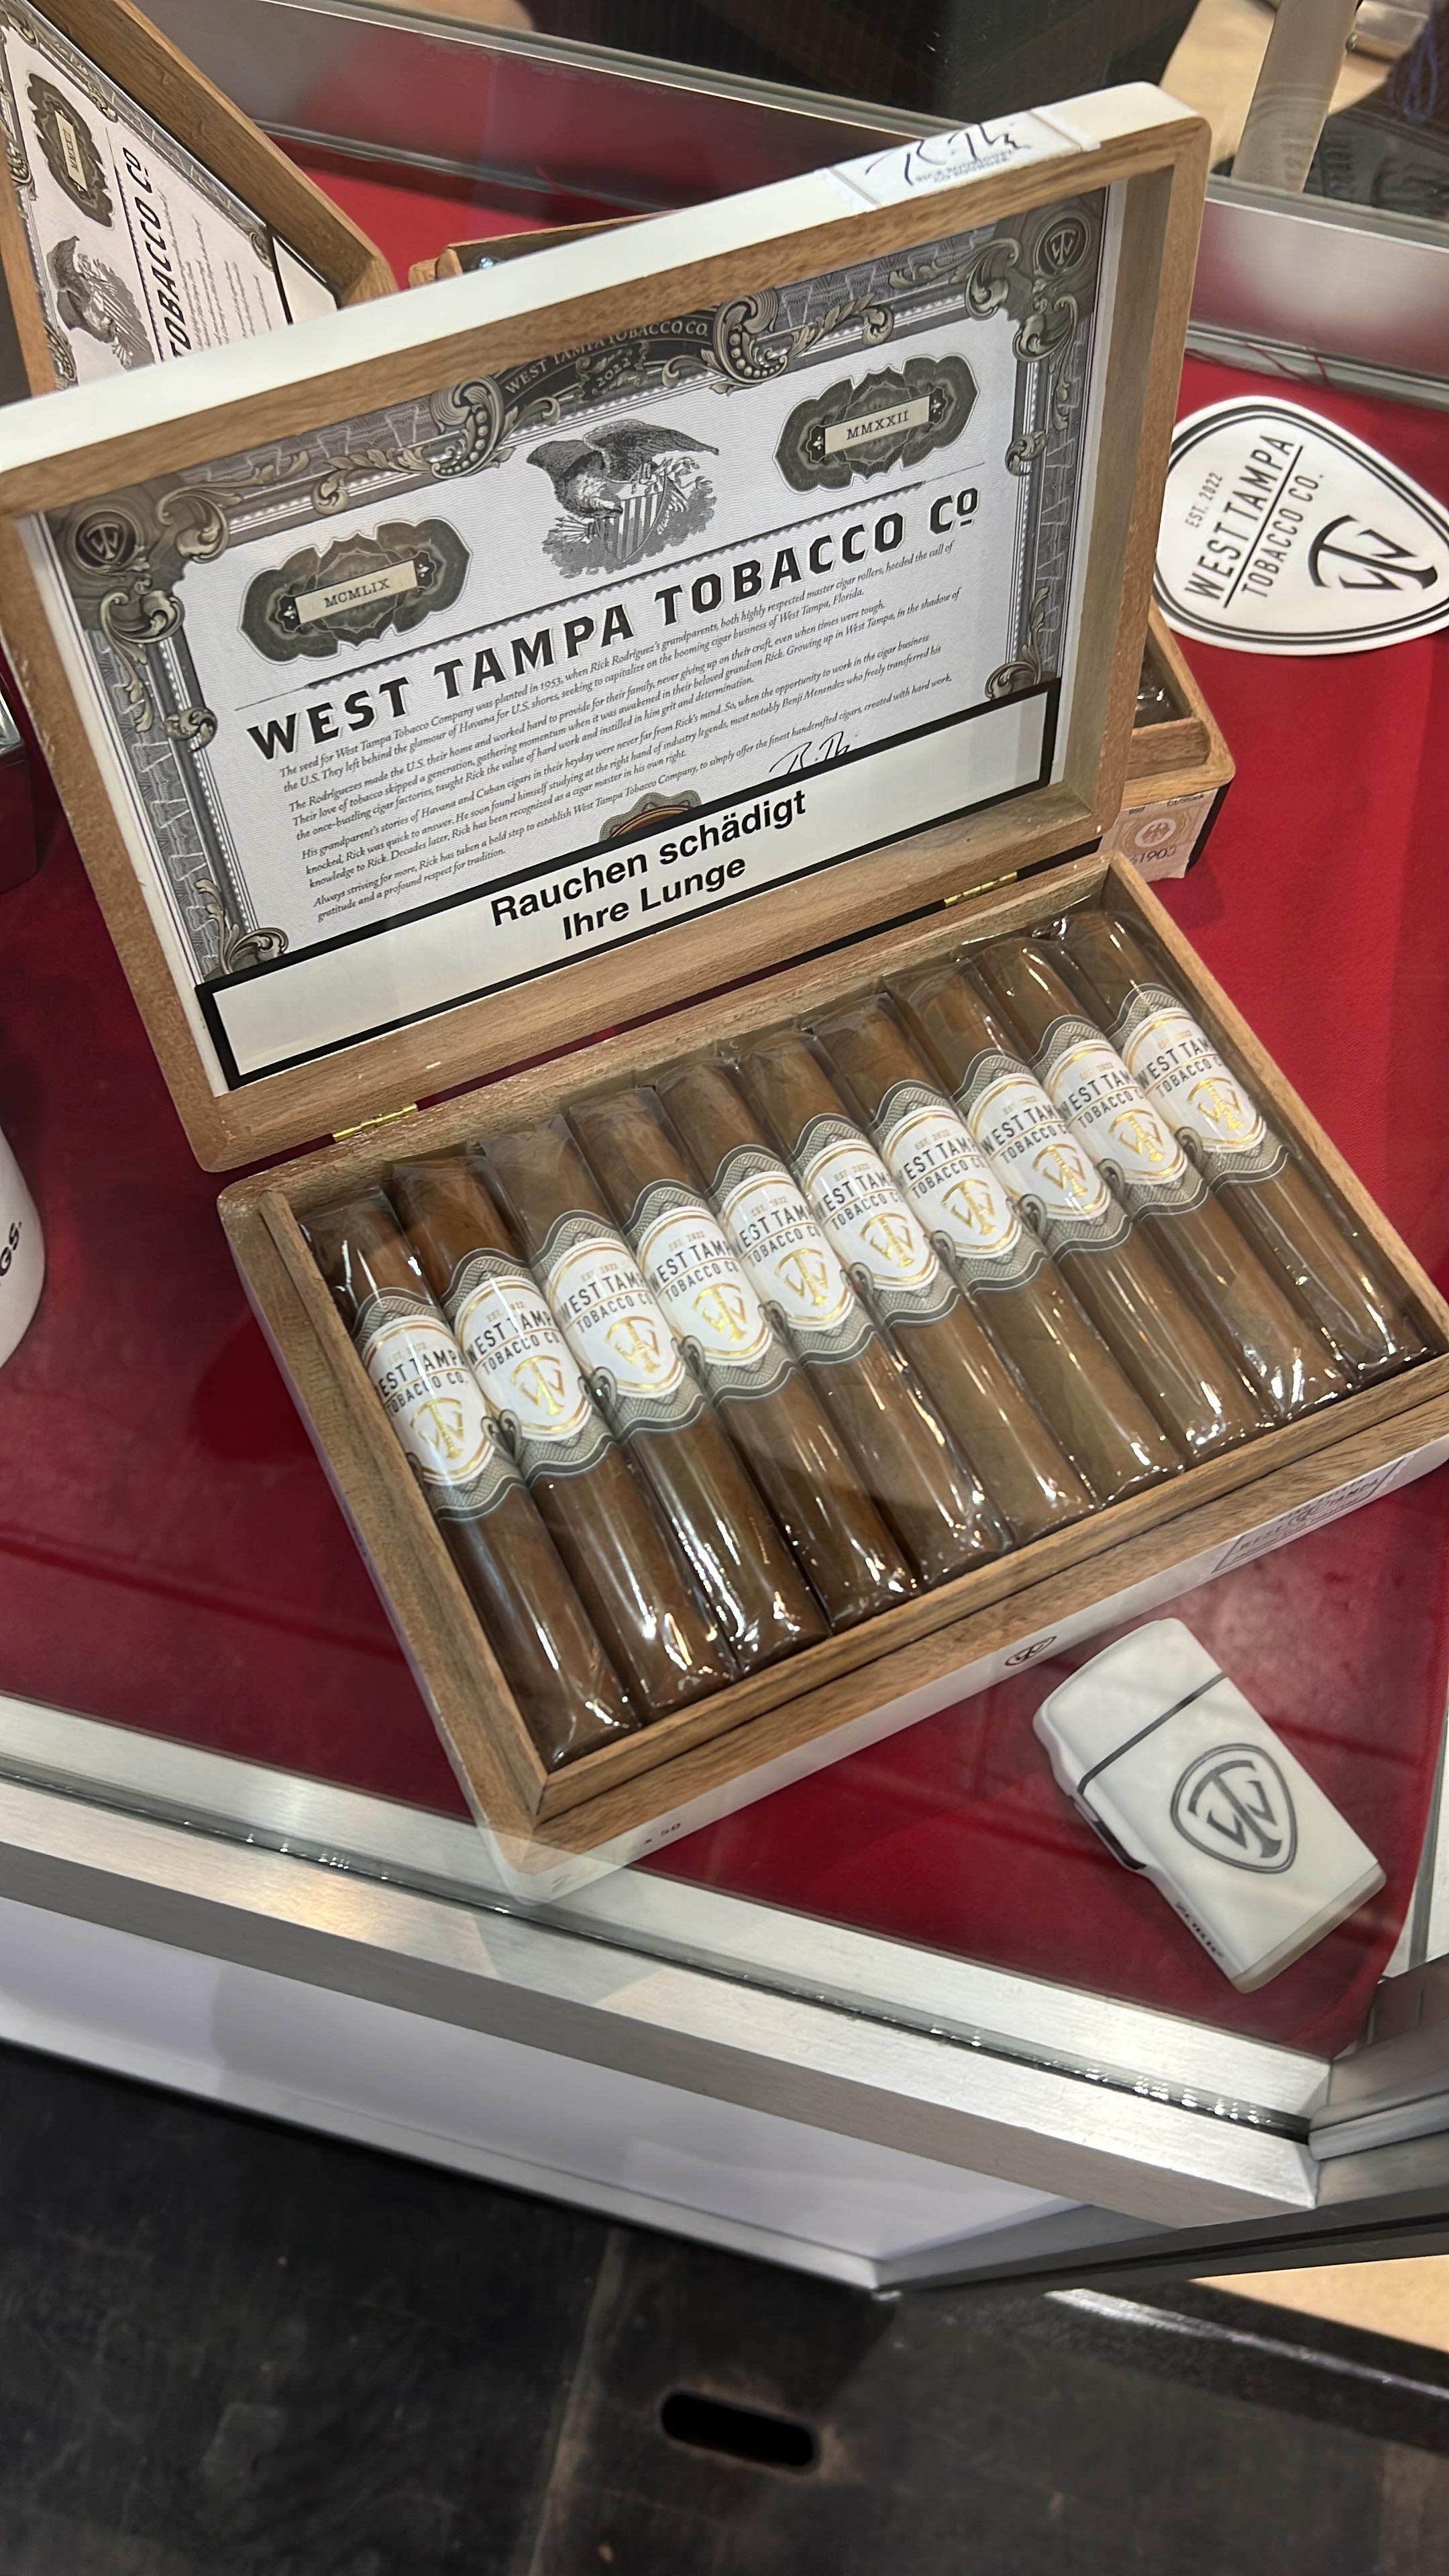 West Tampa Tobacco Co